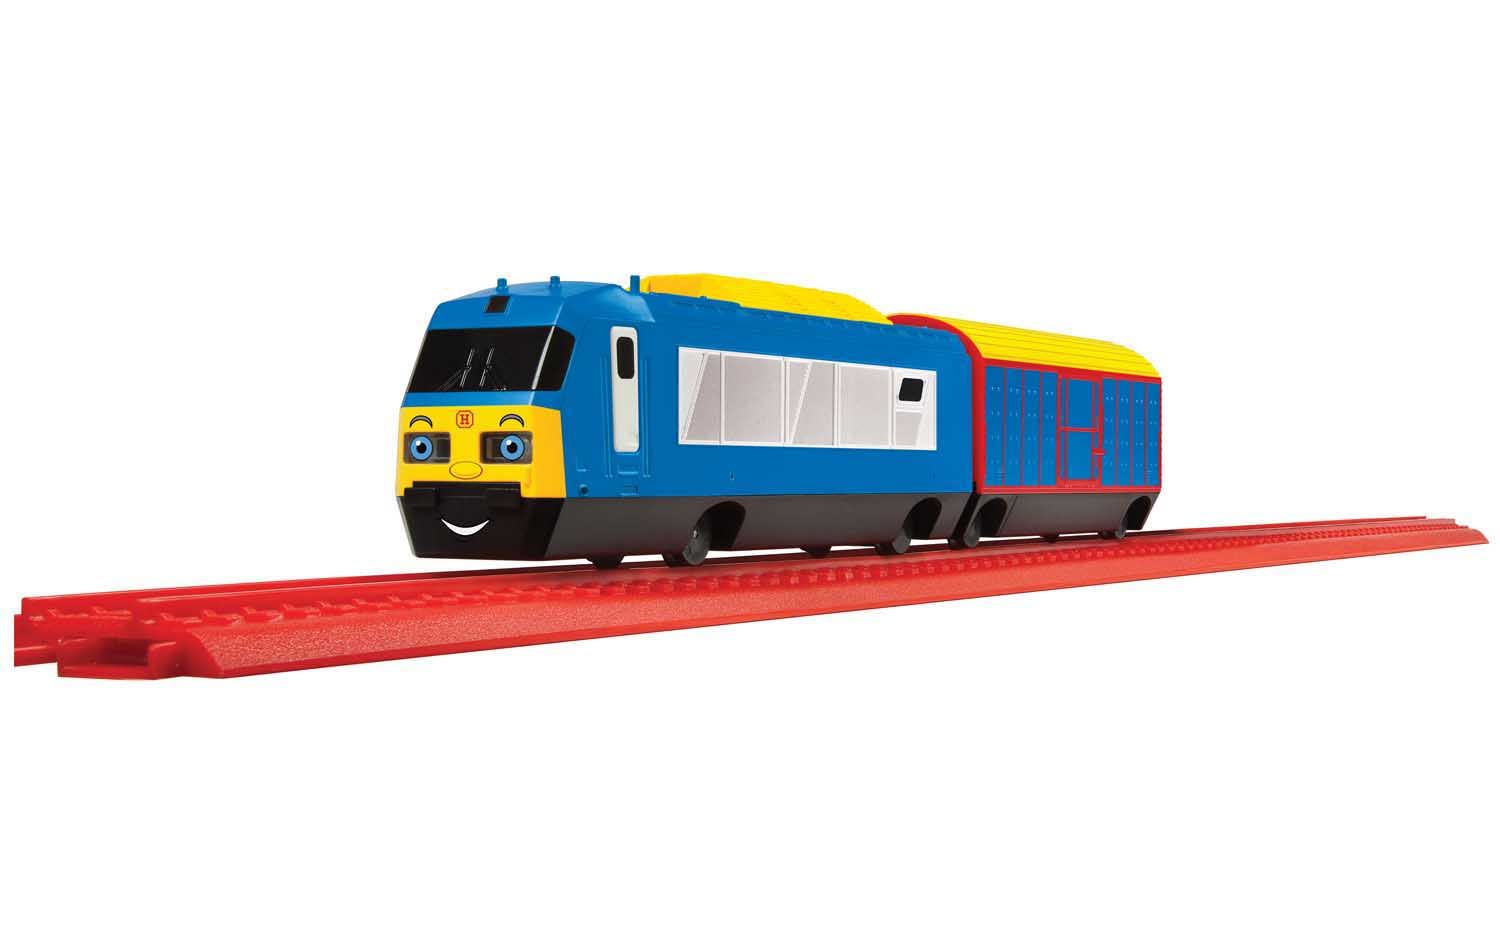 R9314 Playtrains - Thunder Express Goods Battery Operated Train Pack